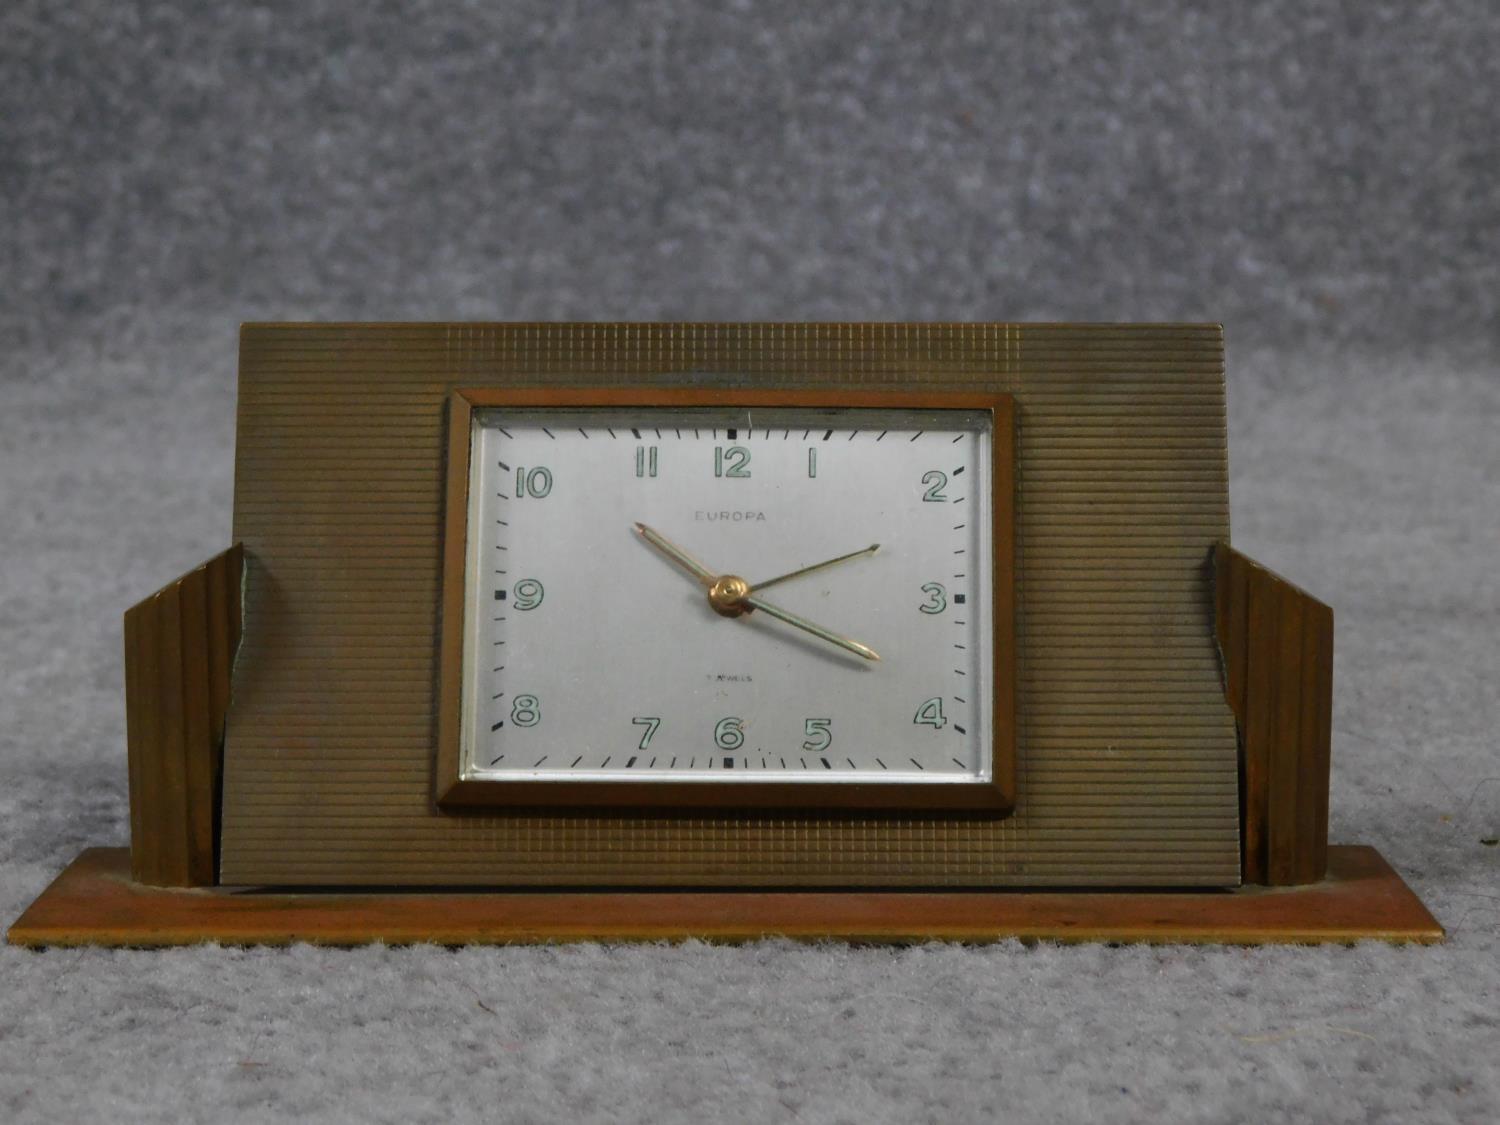 An Art Deco brass desk clock by Europa. Luminous numbers. Geometric form with linear detailing. H.